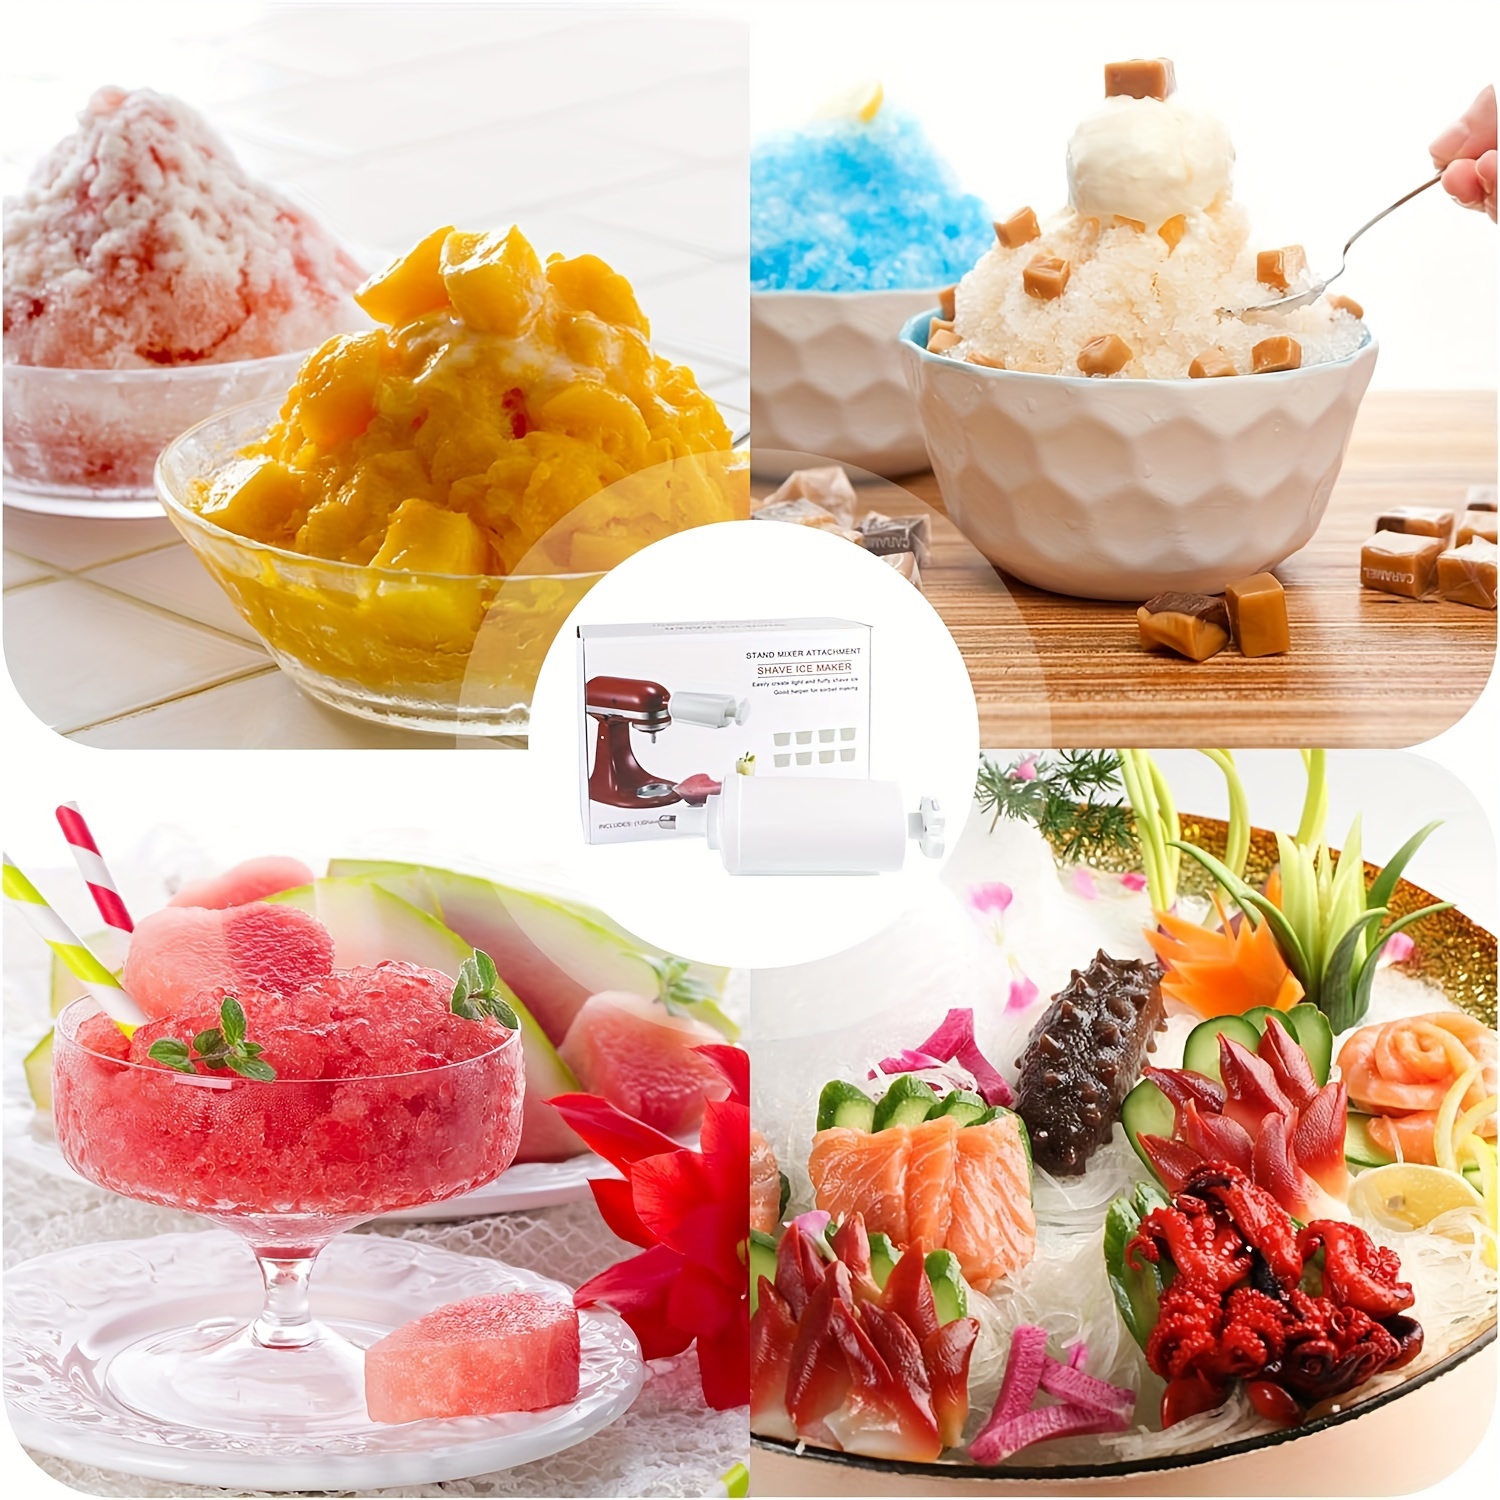 Snow Cone Machine with 8 Ice Molds,Shaved Ice Attachment for